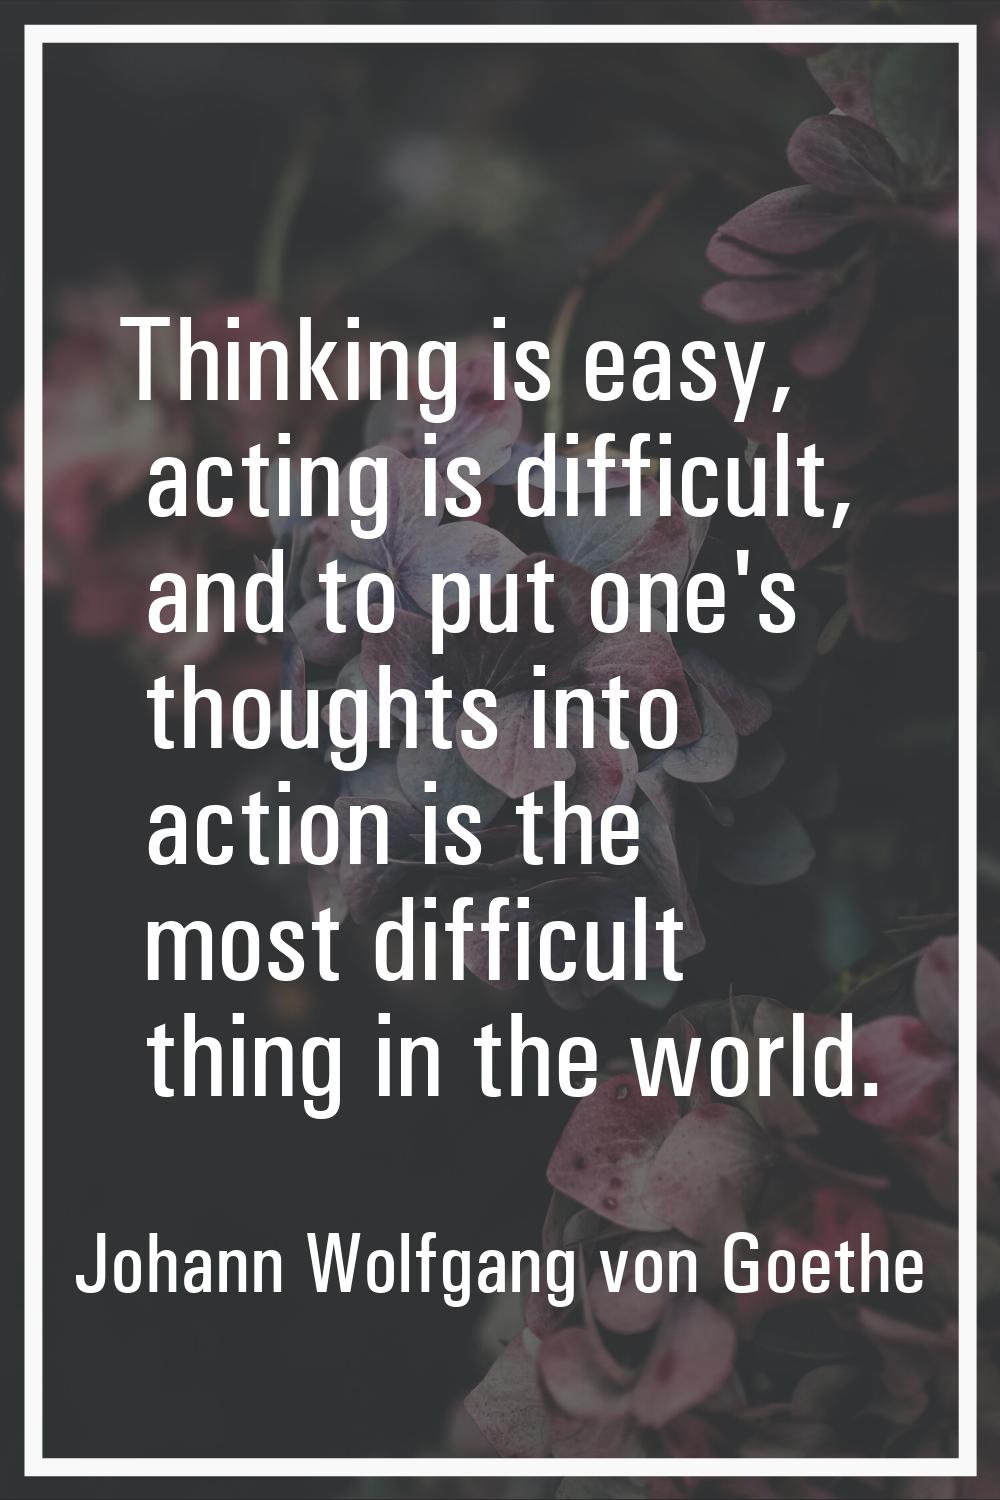 Thinking is easy, acting is difficult, and to put one's thoughts into action is the most difficult 